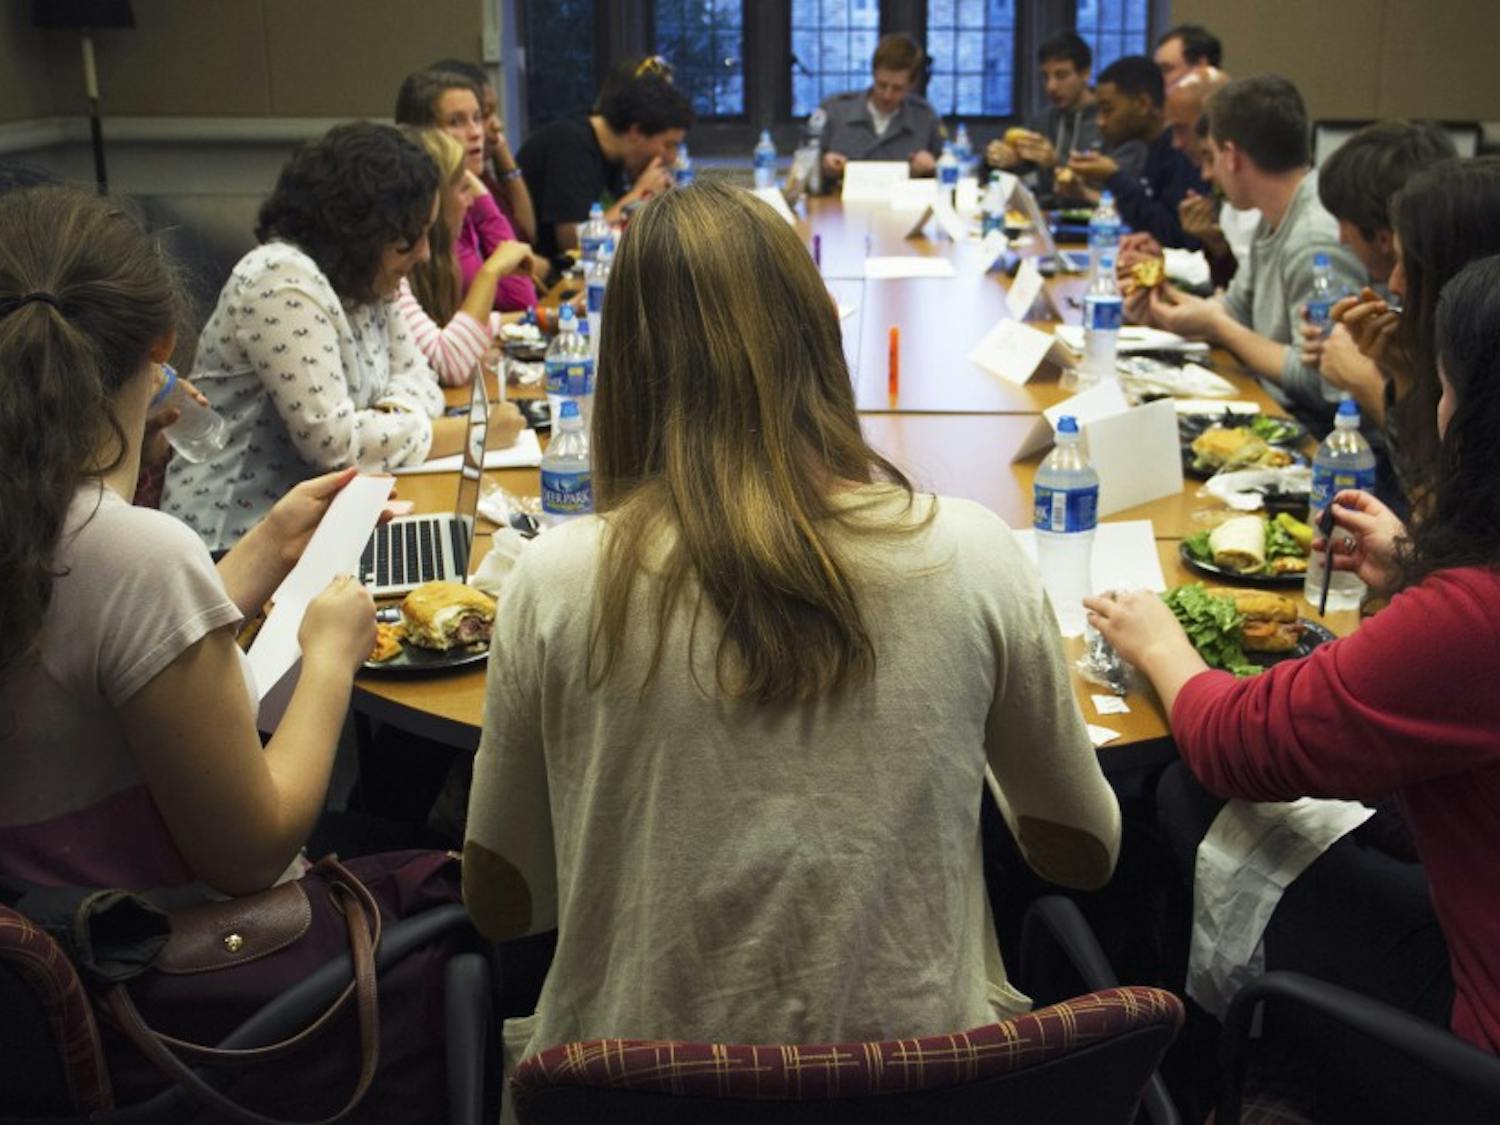 Although Sushi Love is still the top choice for many, the Duke University Student Dining Advisory Committee discussed other possible vendors for Merchants on Points at their Monday meeting.